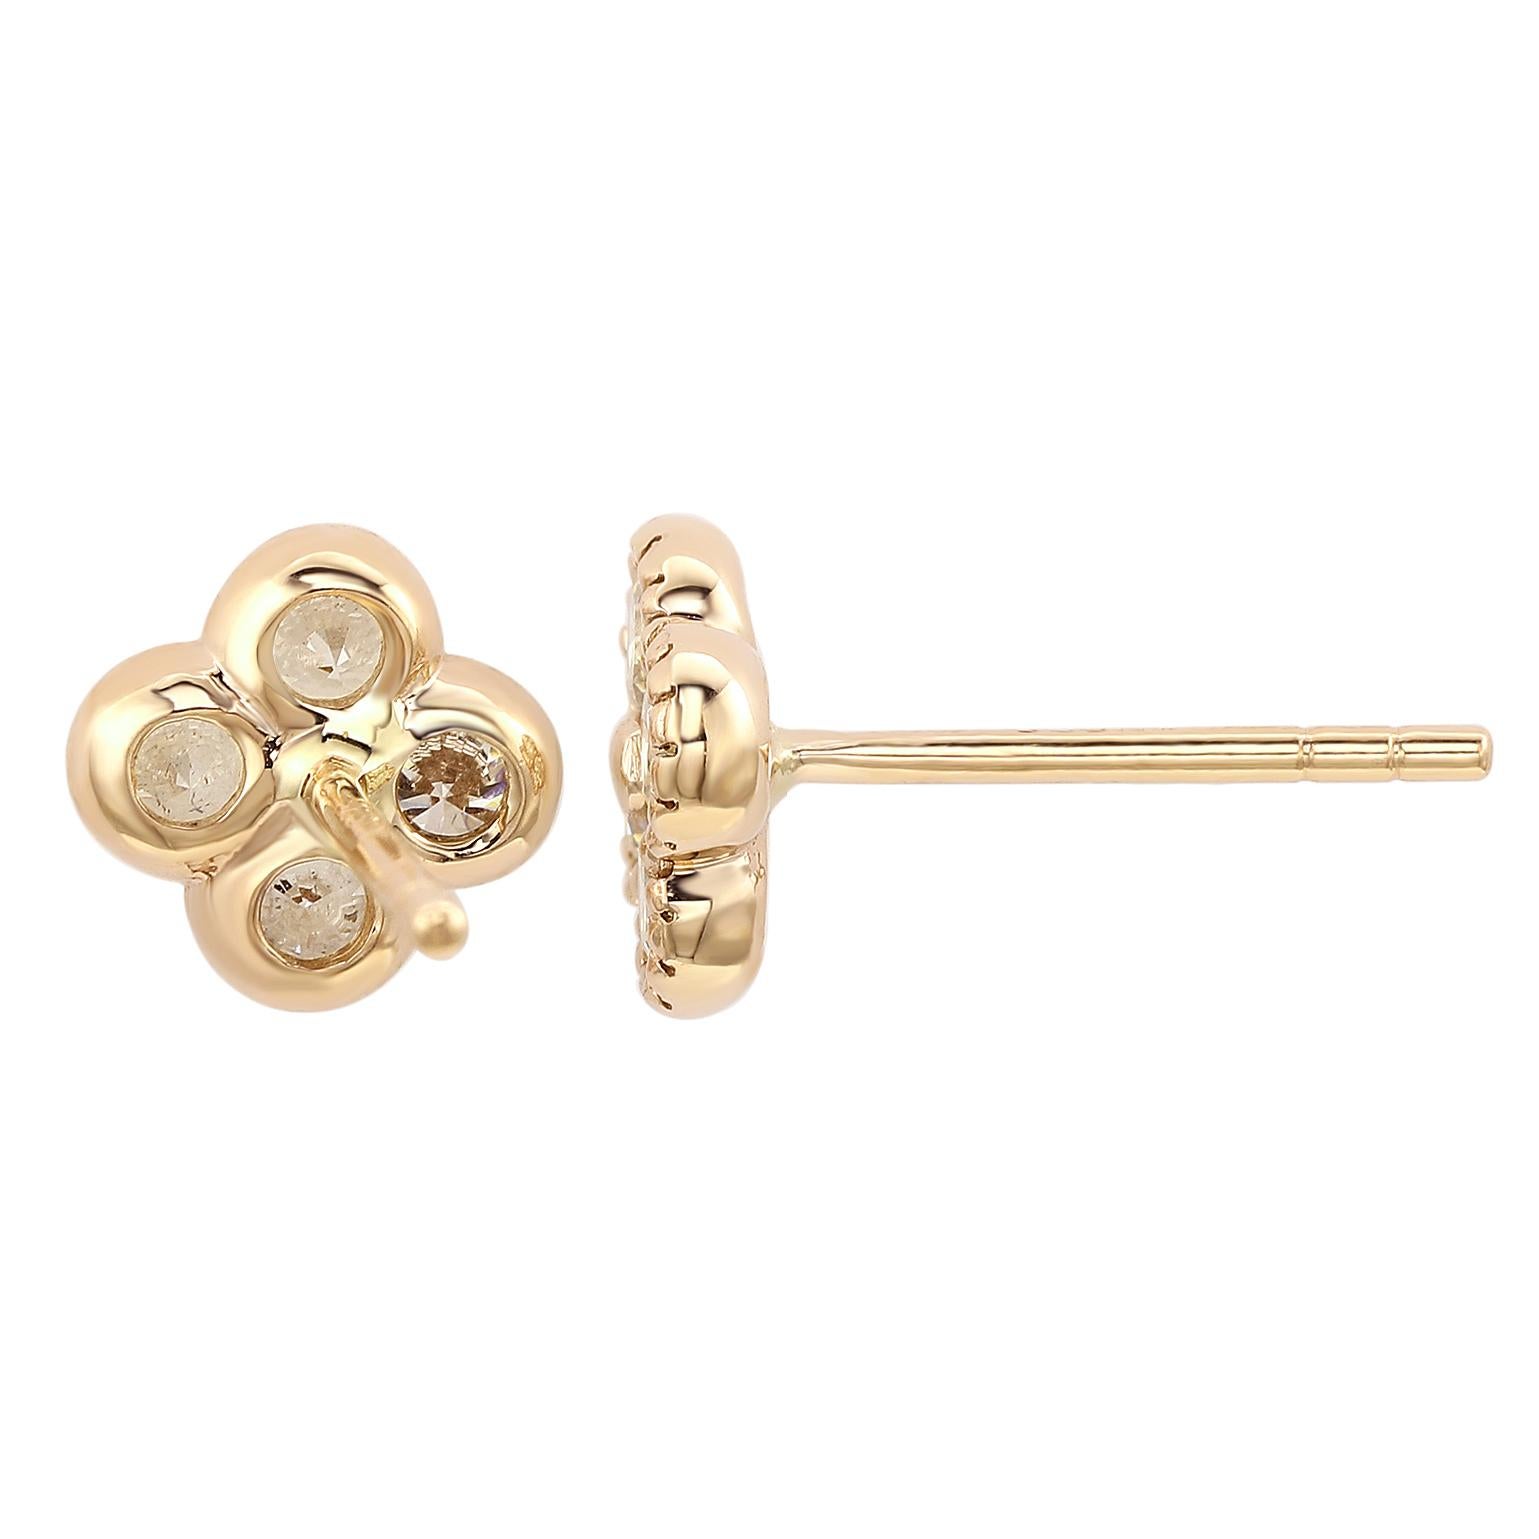 With elegance and subtlety, Suzy Levian once again creates a masterpiece so precise in detail and craftsmanship. These earrings embody class, luxury and style, with it's whimsical clover motifs. The clover stud design whispers the message that